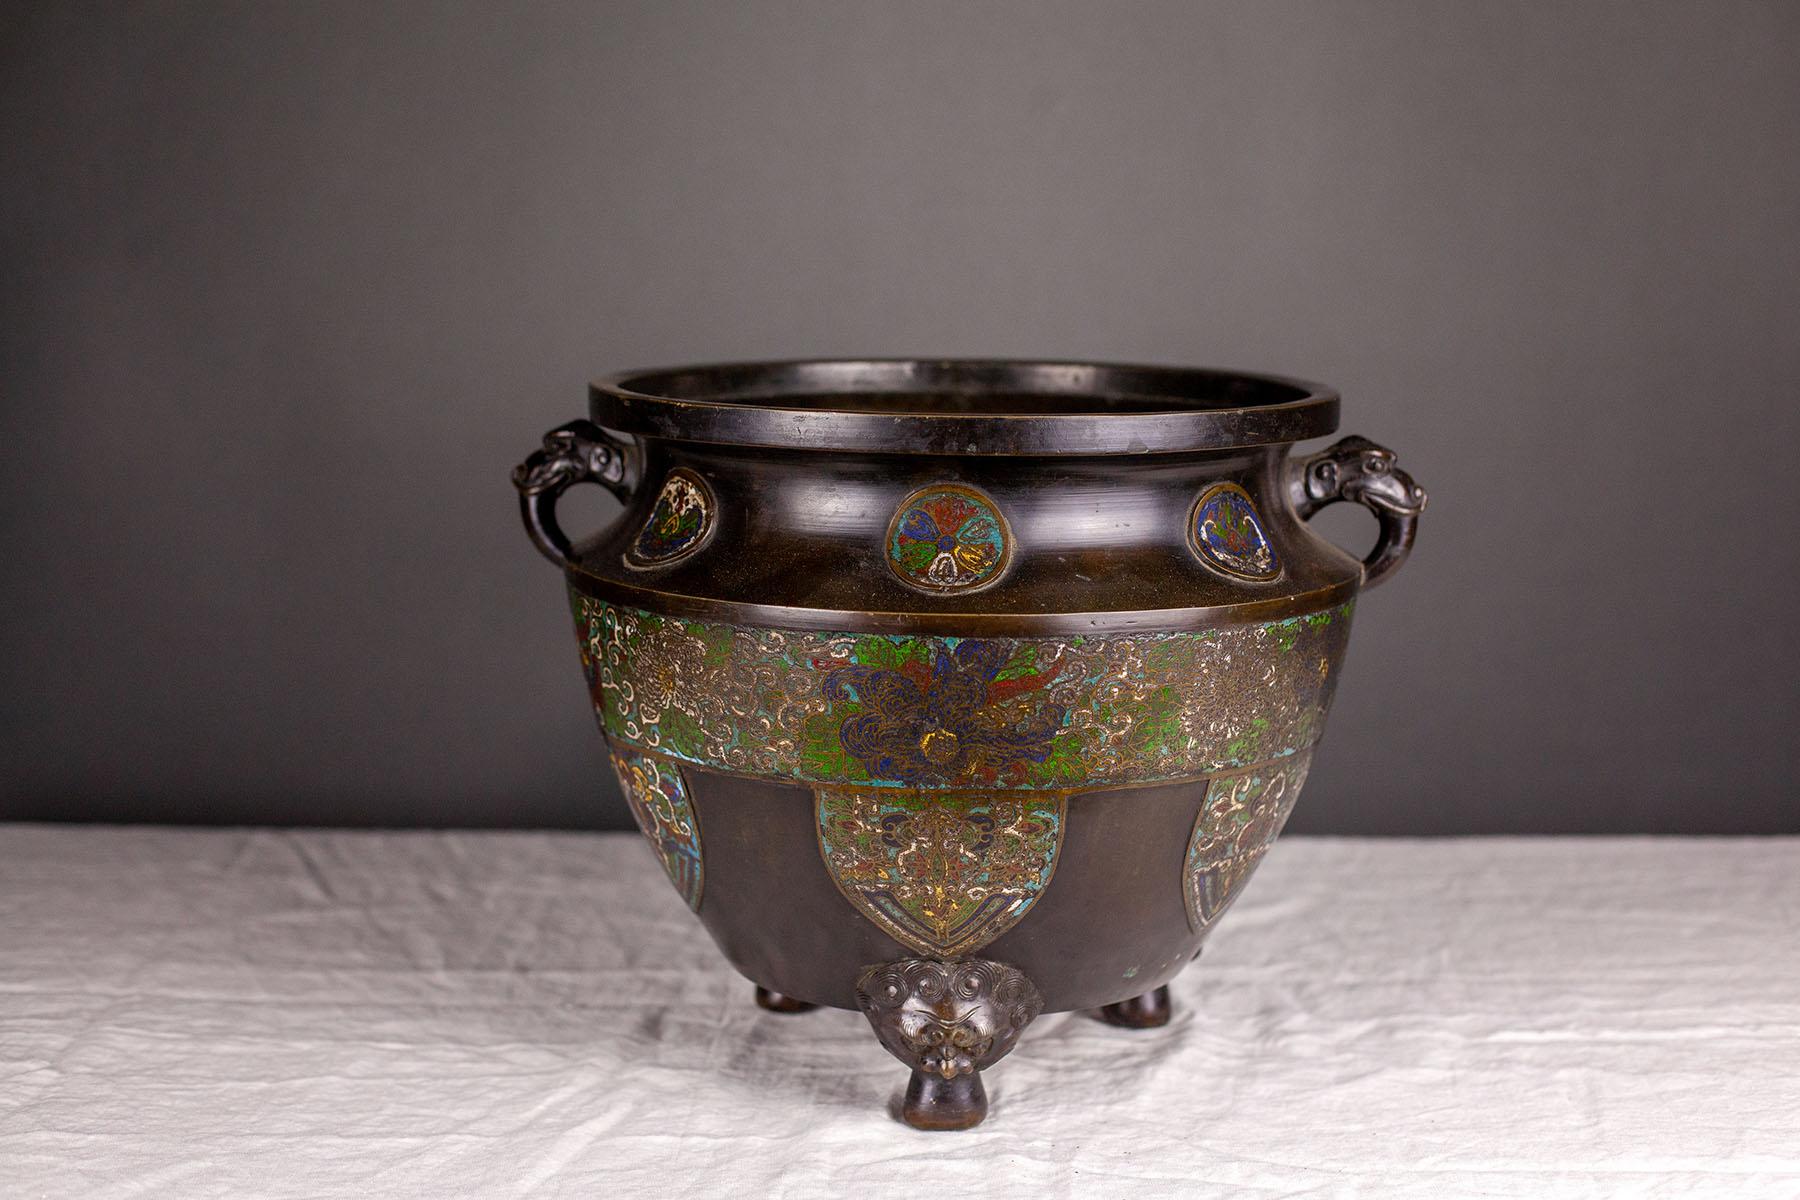 For your consideration, we presents this 1920s, cloisonné bowl.

Beautifully detailed cloisonne vessel perfect for your favorite house plant. Equally as beautiful left empty, this piece is destined to become a favorite.